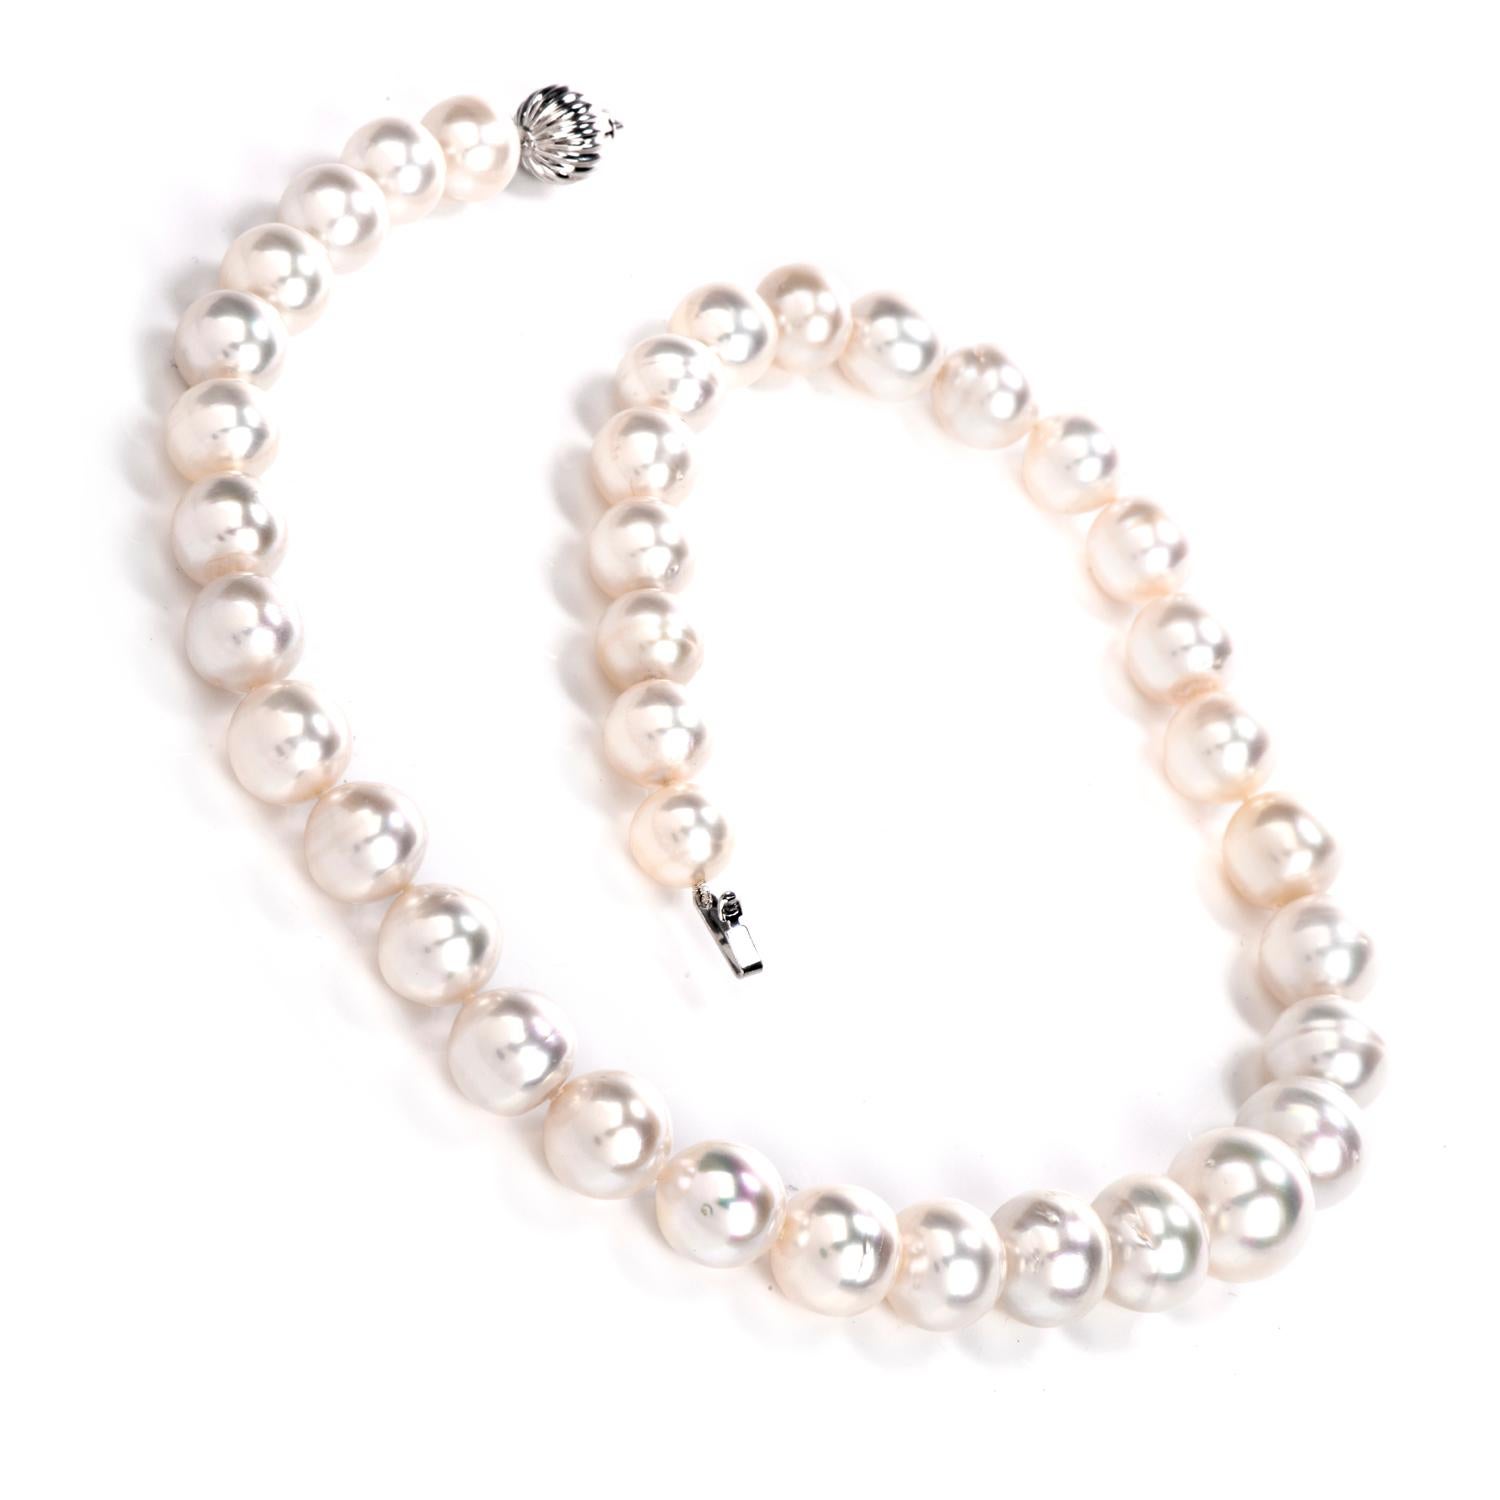 This elegant south sea pearl strand features a white gold round clasp, necklace measures 17.25” long and weighs 80 grams. Composed of 37 lustrous, white cream-colored South Sea pearls ranging from 15mm to 10mm in diameter. Secures with insert clasp